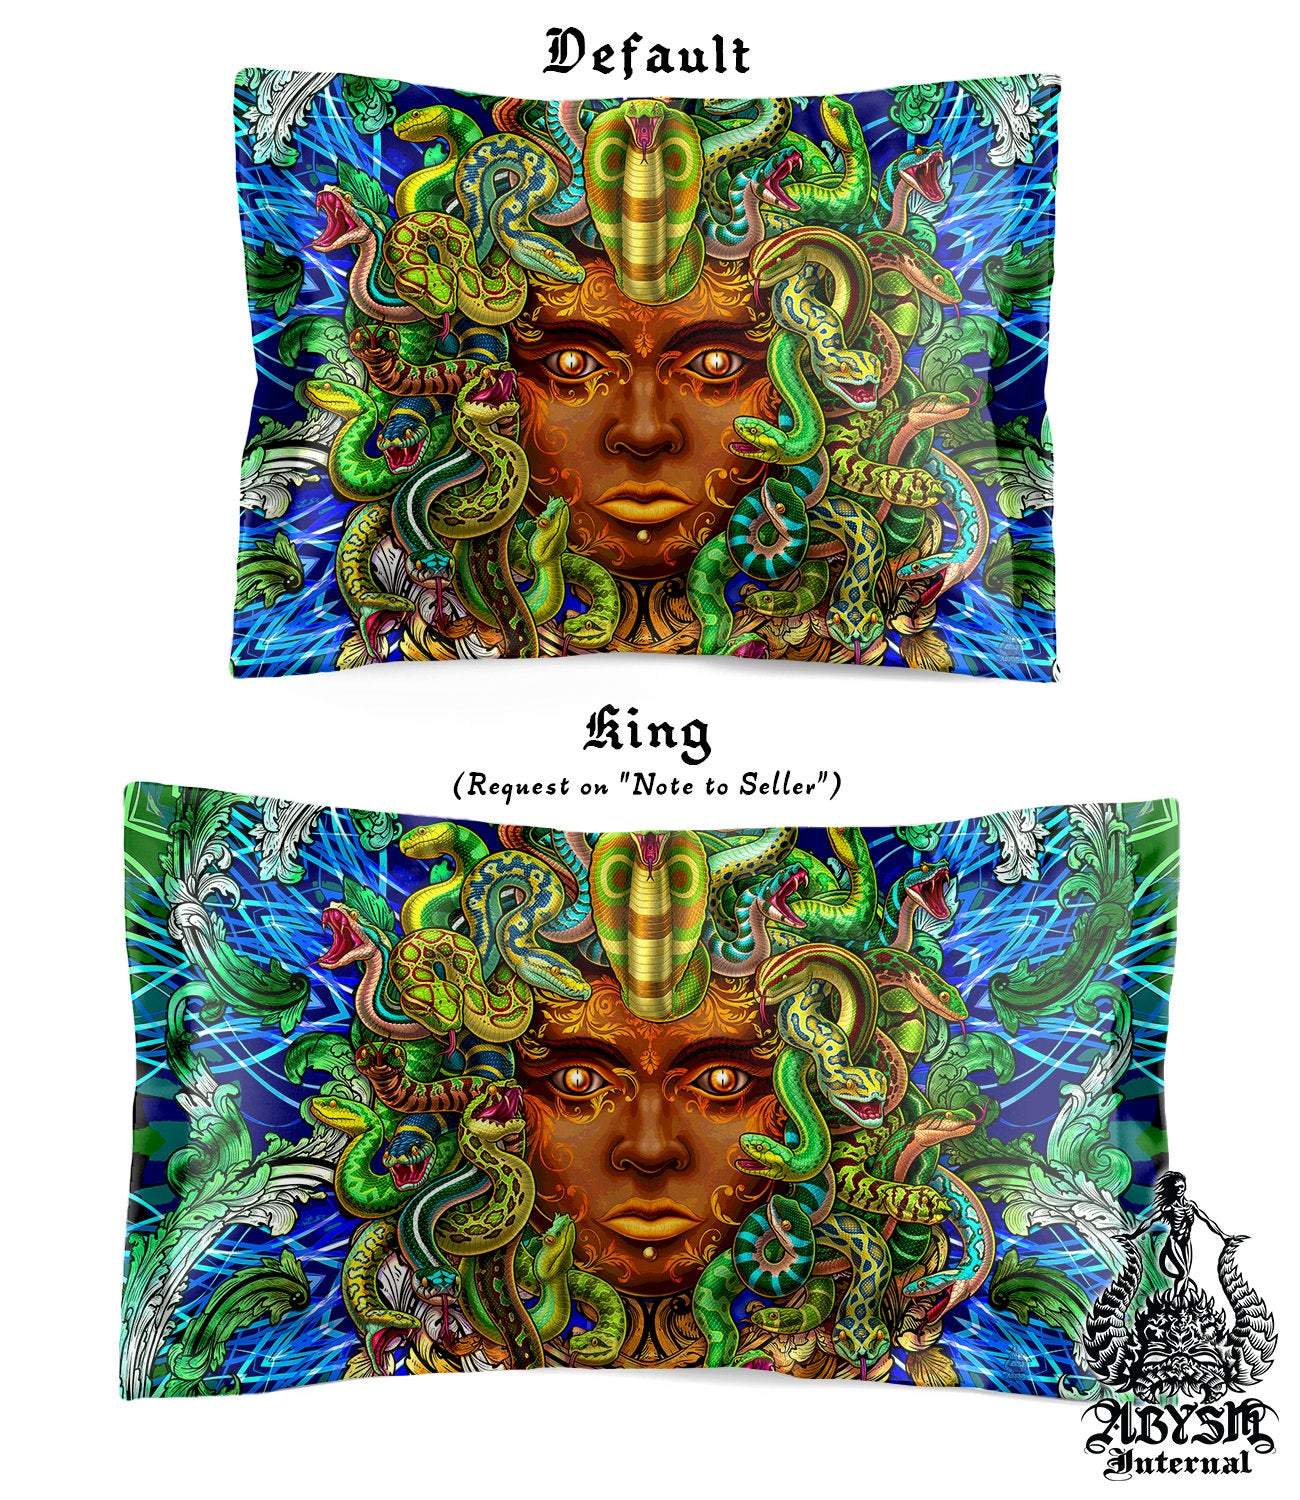 Medusa Bedding Set, Comforter and Duvet, Fantasy Indie Bed Cover and Bedroom Decor, King, Queen and Twin Size - Nature - Abysm Internal